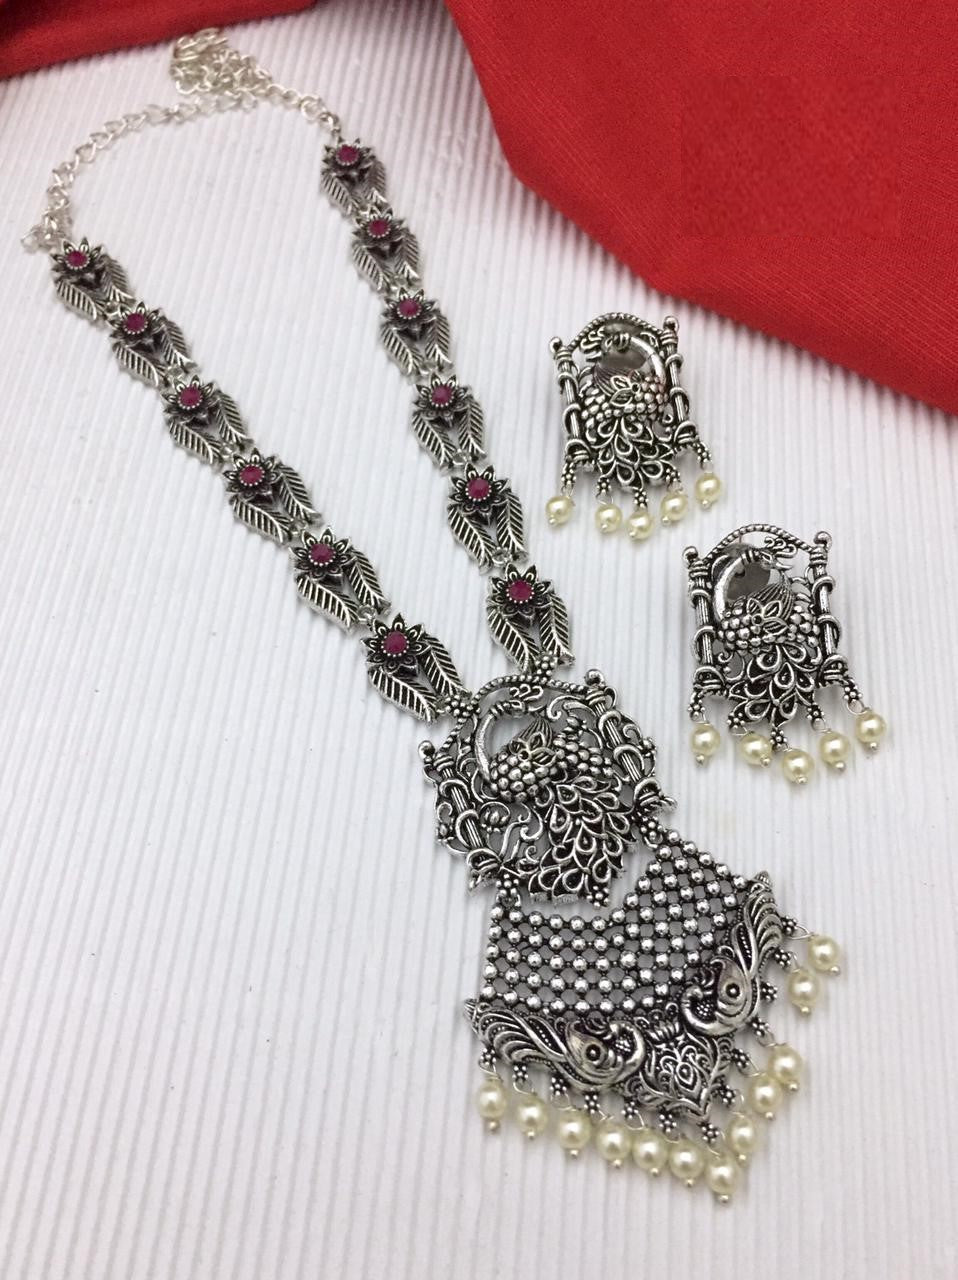 German Silver Oxidized Metal Unique Peacock Pendant Necklace Set With Earrings